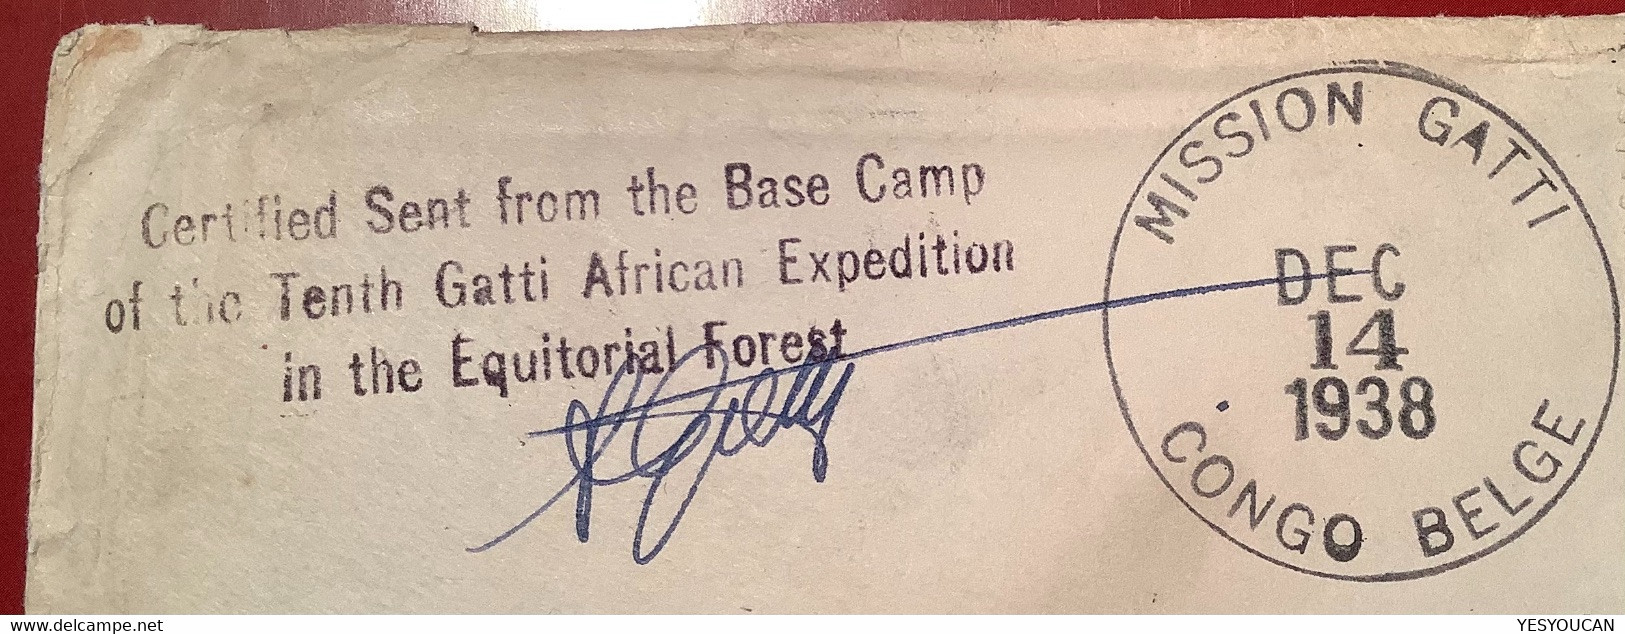 MISSION GATTI CONGO BELGE 1938 Cover>CANADA RRR ! STANLEYVILLE+BASE CAMP10th AFRICAN EXPEDITION EQUATORIAL FOREST(lettre - Briefe U. Dokumente